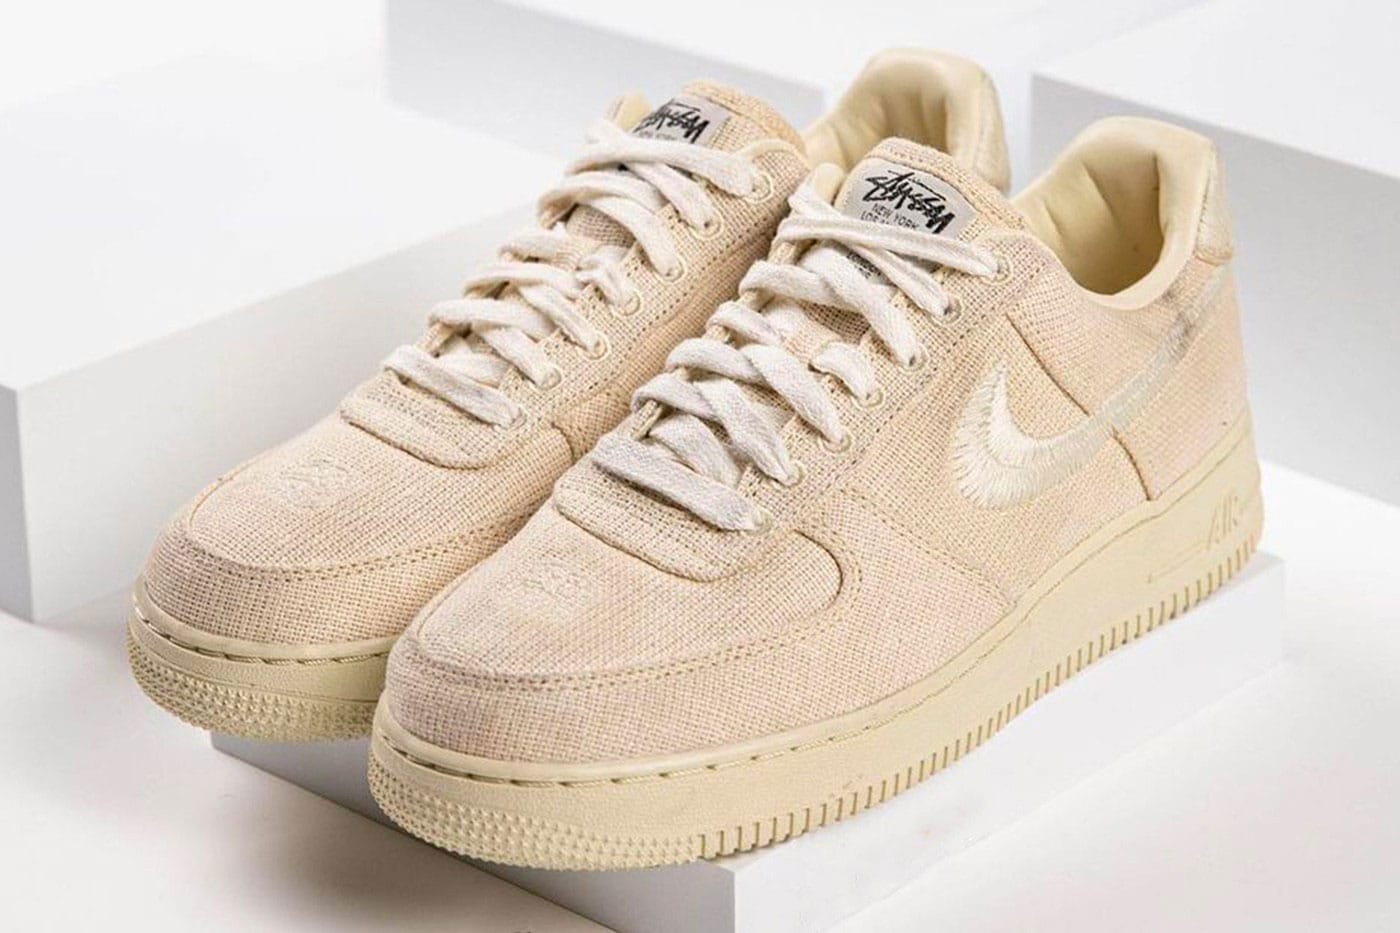 Stussy x Nike Air Force 1 Receives Release Date | HYPEBAE